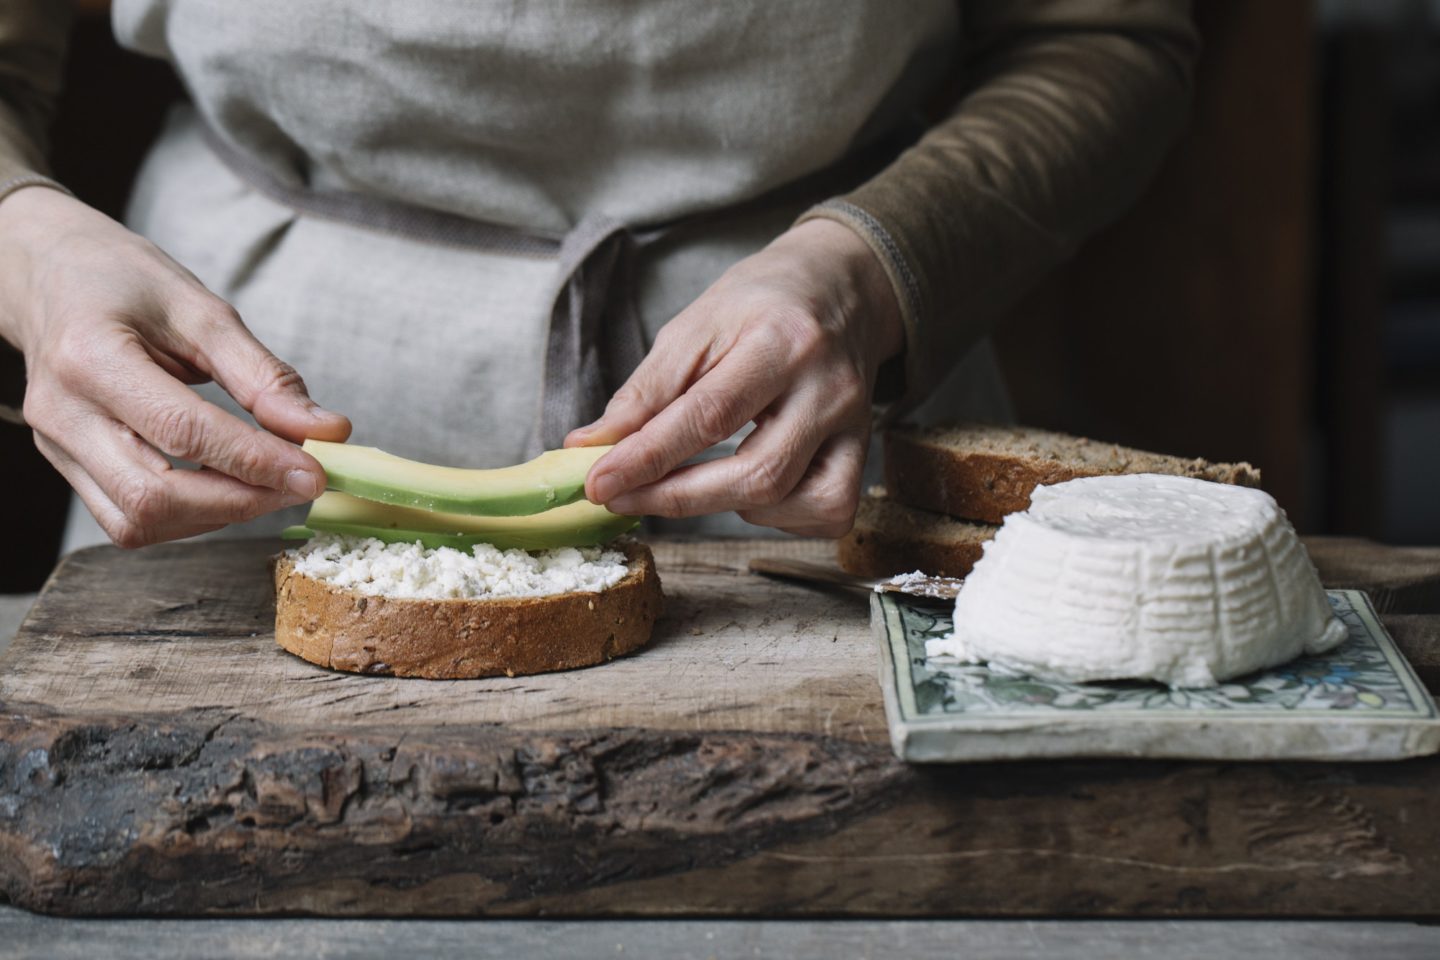 Woman placing slices of avocado onto sliced bread with ricotta, mid section